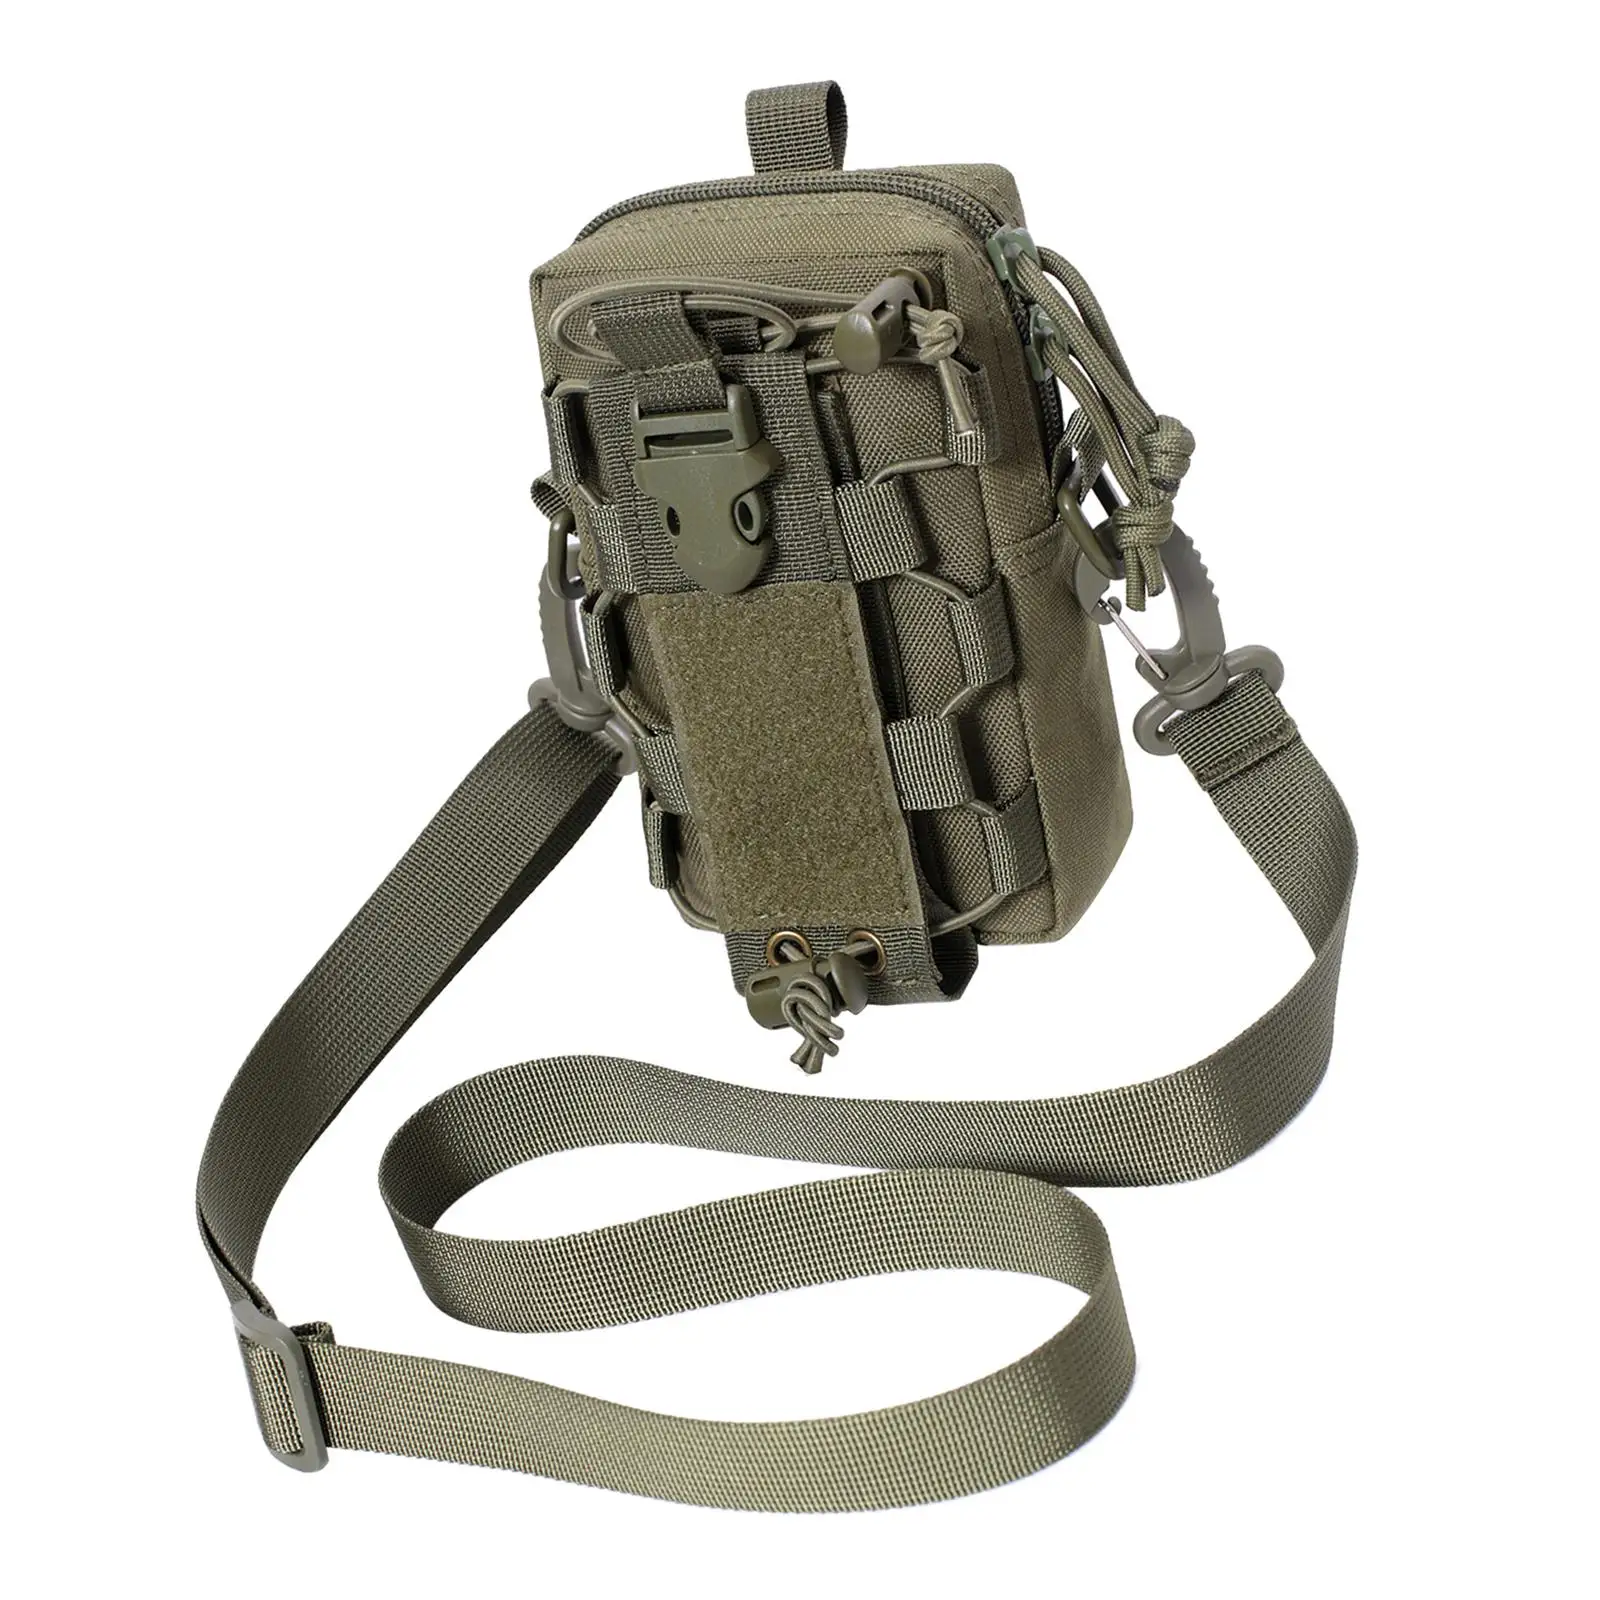  Bag with Shoulder Strap Waist Bag Pouch Organizer for Travel Hiking